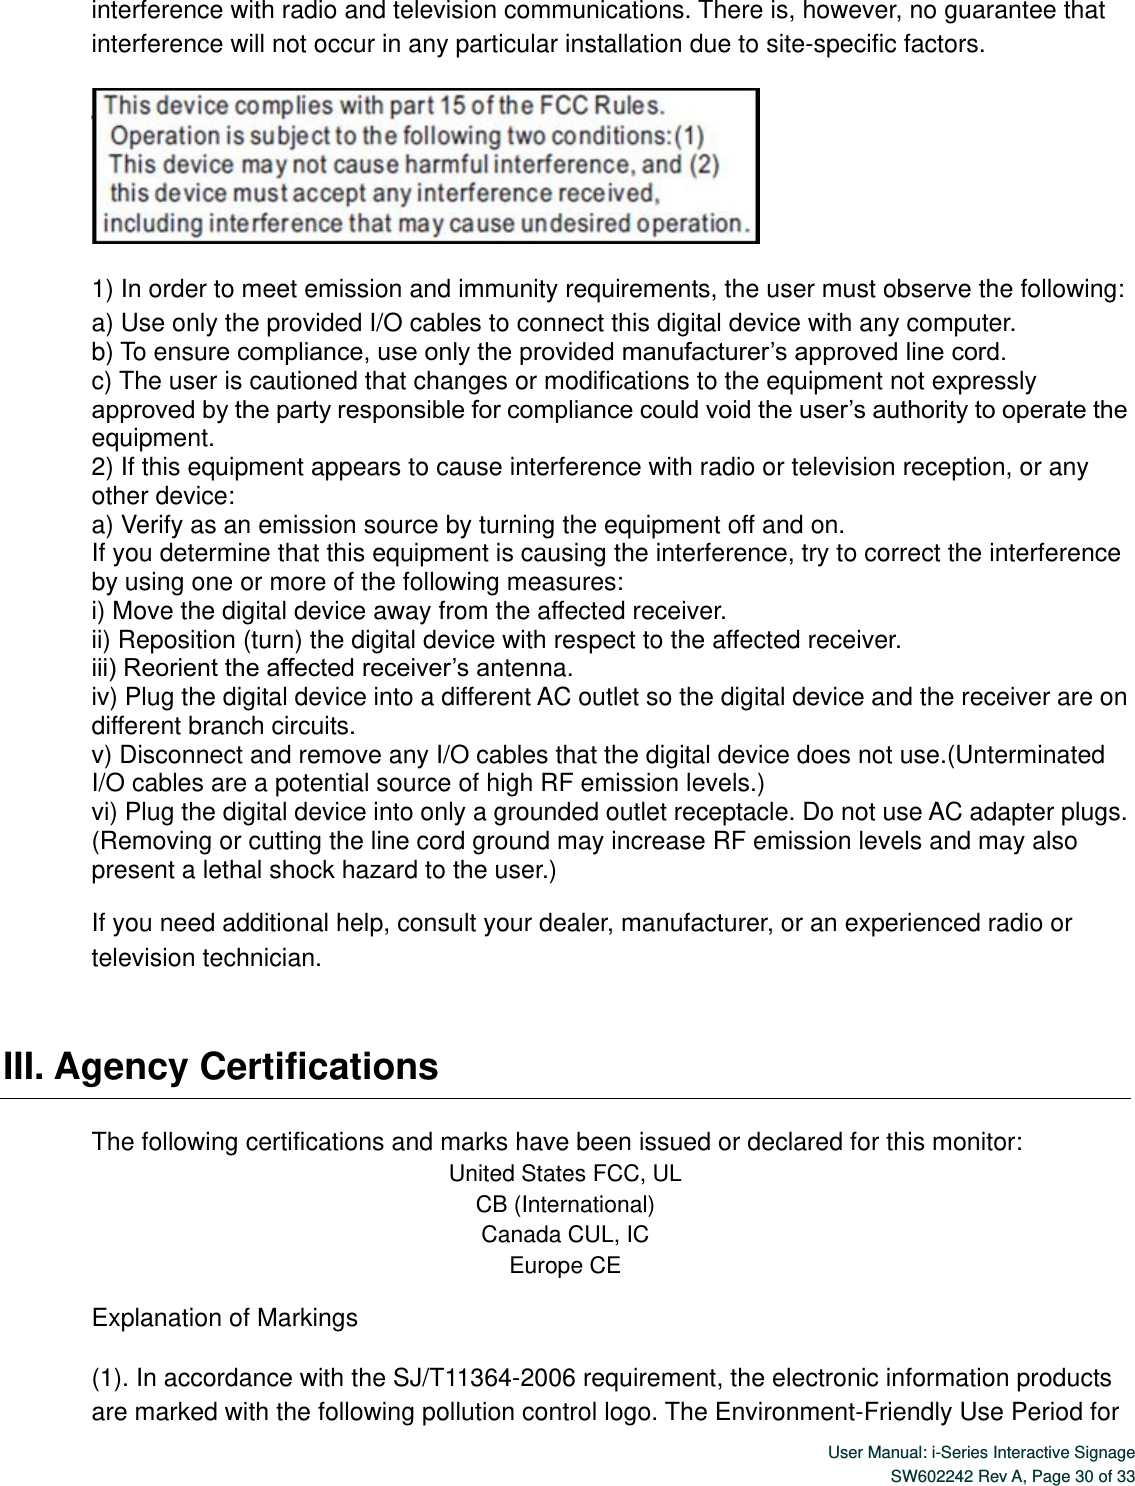  User Manual: i-Series Interactive Signage SW602242 Rev A, Page 30 of 33   interference with radio and television communications. There is, however, no guarantee that interference will not occur in any particular installation due to site-specific factors.  1) In order to meet emission and immunity requirements, the user must observe the following: a) Use only the provided I/O cables to connect this digital device with any computer. b) To ensure compliance, use only the provided manufacturer’s approved line cord. c) The user is cautioned that changes or modifications to the equipment not expressly approved by the party responsible for compliance could void the user’s authority to operate the equipment. 2) If this equipment appears to cause interference with radio or television reception, or any other device: a) Verify as an emission source by turning the equipment off and on. If you determine that this equipment is causing the interference, try to correct the interference by using one or more of the following measures: i) Move the digital device away from the affected receiver.   ii) Reposition (turn) the digital device with respect to the affected receiver. iii) Reorient the affected receiver’s antenna. iv) Plug the digital device into a different AC outlet so the digital device and the receiver are on different branch circuits. v) Disconnect and remove any I/O cables that the digital device does not use.(Unterminated I/O cables are a potential source of high RF emission levels.) vi) Plug the digital device into only a grounded outlet receptacle. Do not use AC adapter plugs. (Removing or cutting the line cord ground may increase RF emission levels and may also present a lethal shock hazard to the user.) If you need additional help, consult your dealer, manufacturer, or an experienced radio or television technician.    III. Agency Certifications    The following certifications and marks have been issued or declared for this monitor: United States FCC, UL CB (International) Canada CUL, IC Europe CE Explanation of Markings (1). In accordance with the SJ/T11364-2006 requirement, the electronic information products are marked with the following pollution control logo. The Environment-Friendly Use Period for 